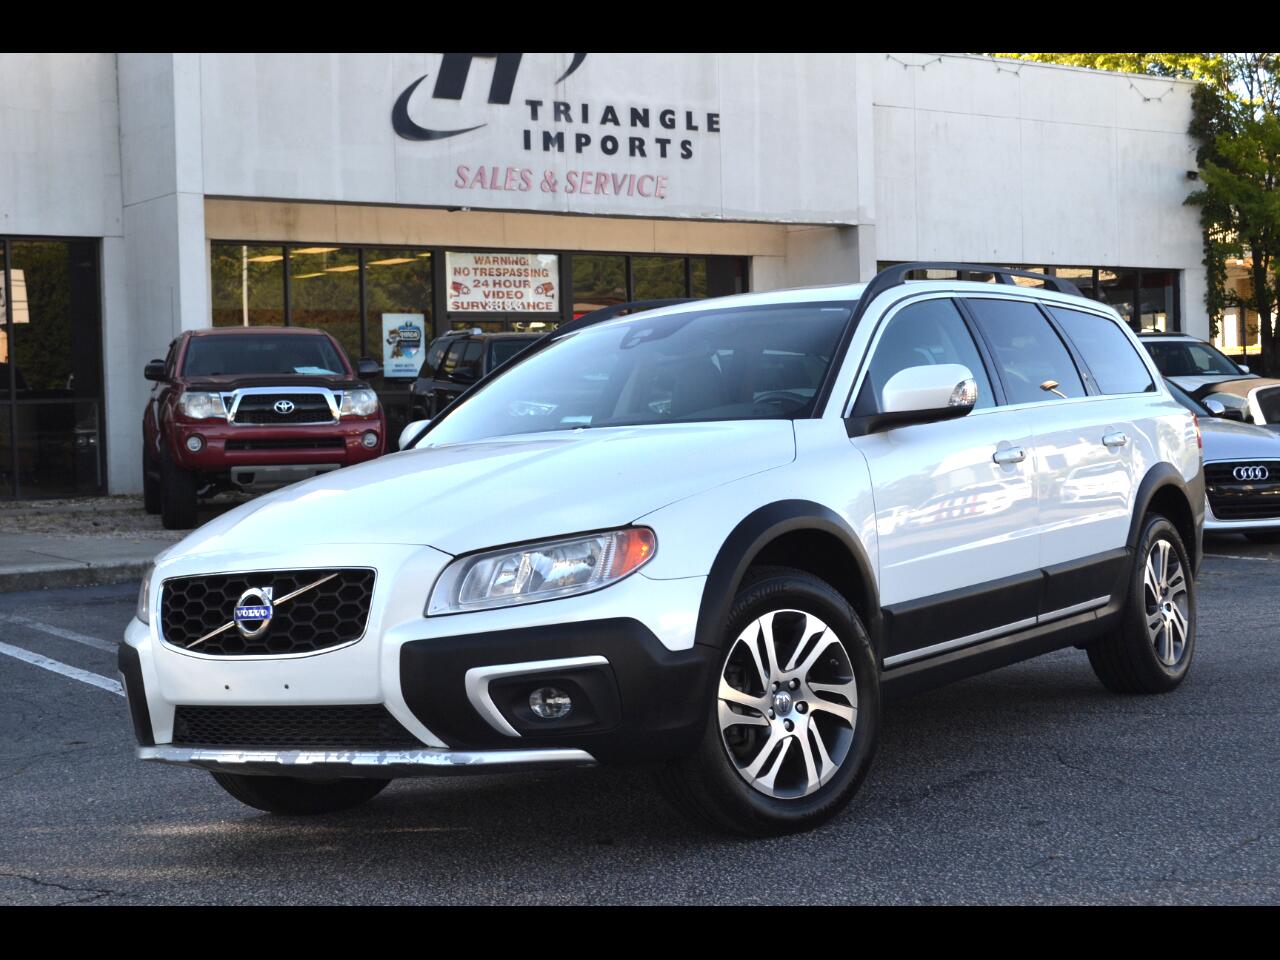 Used 2015 Volvo XC70 FWD 4dr Wgn T5 Drive-E Premier Plus for Sale in  Raleigh NC 27604 Triangle Imports